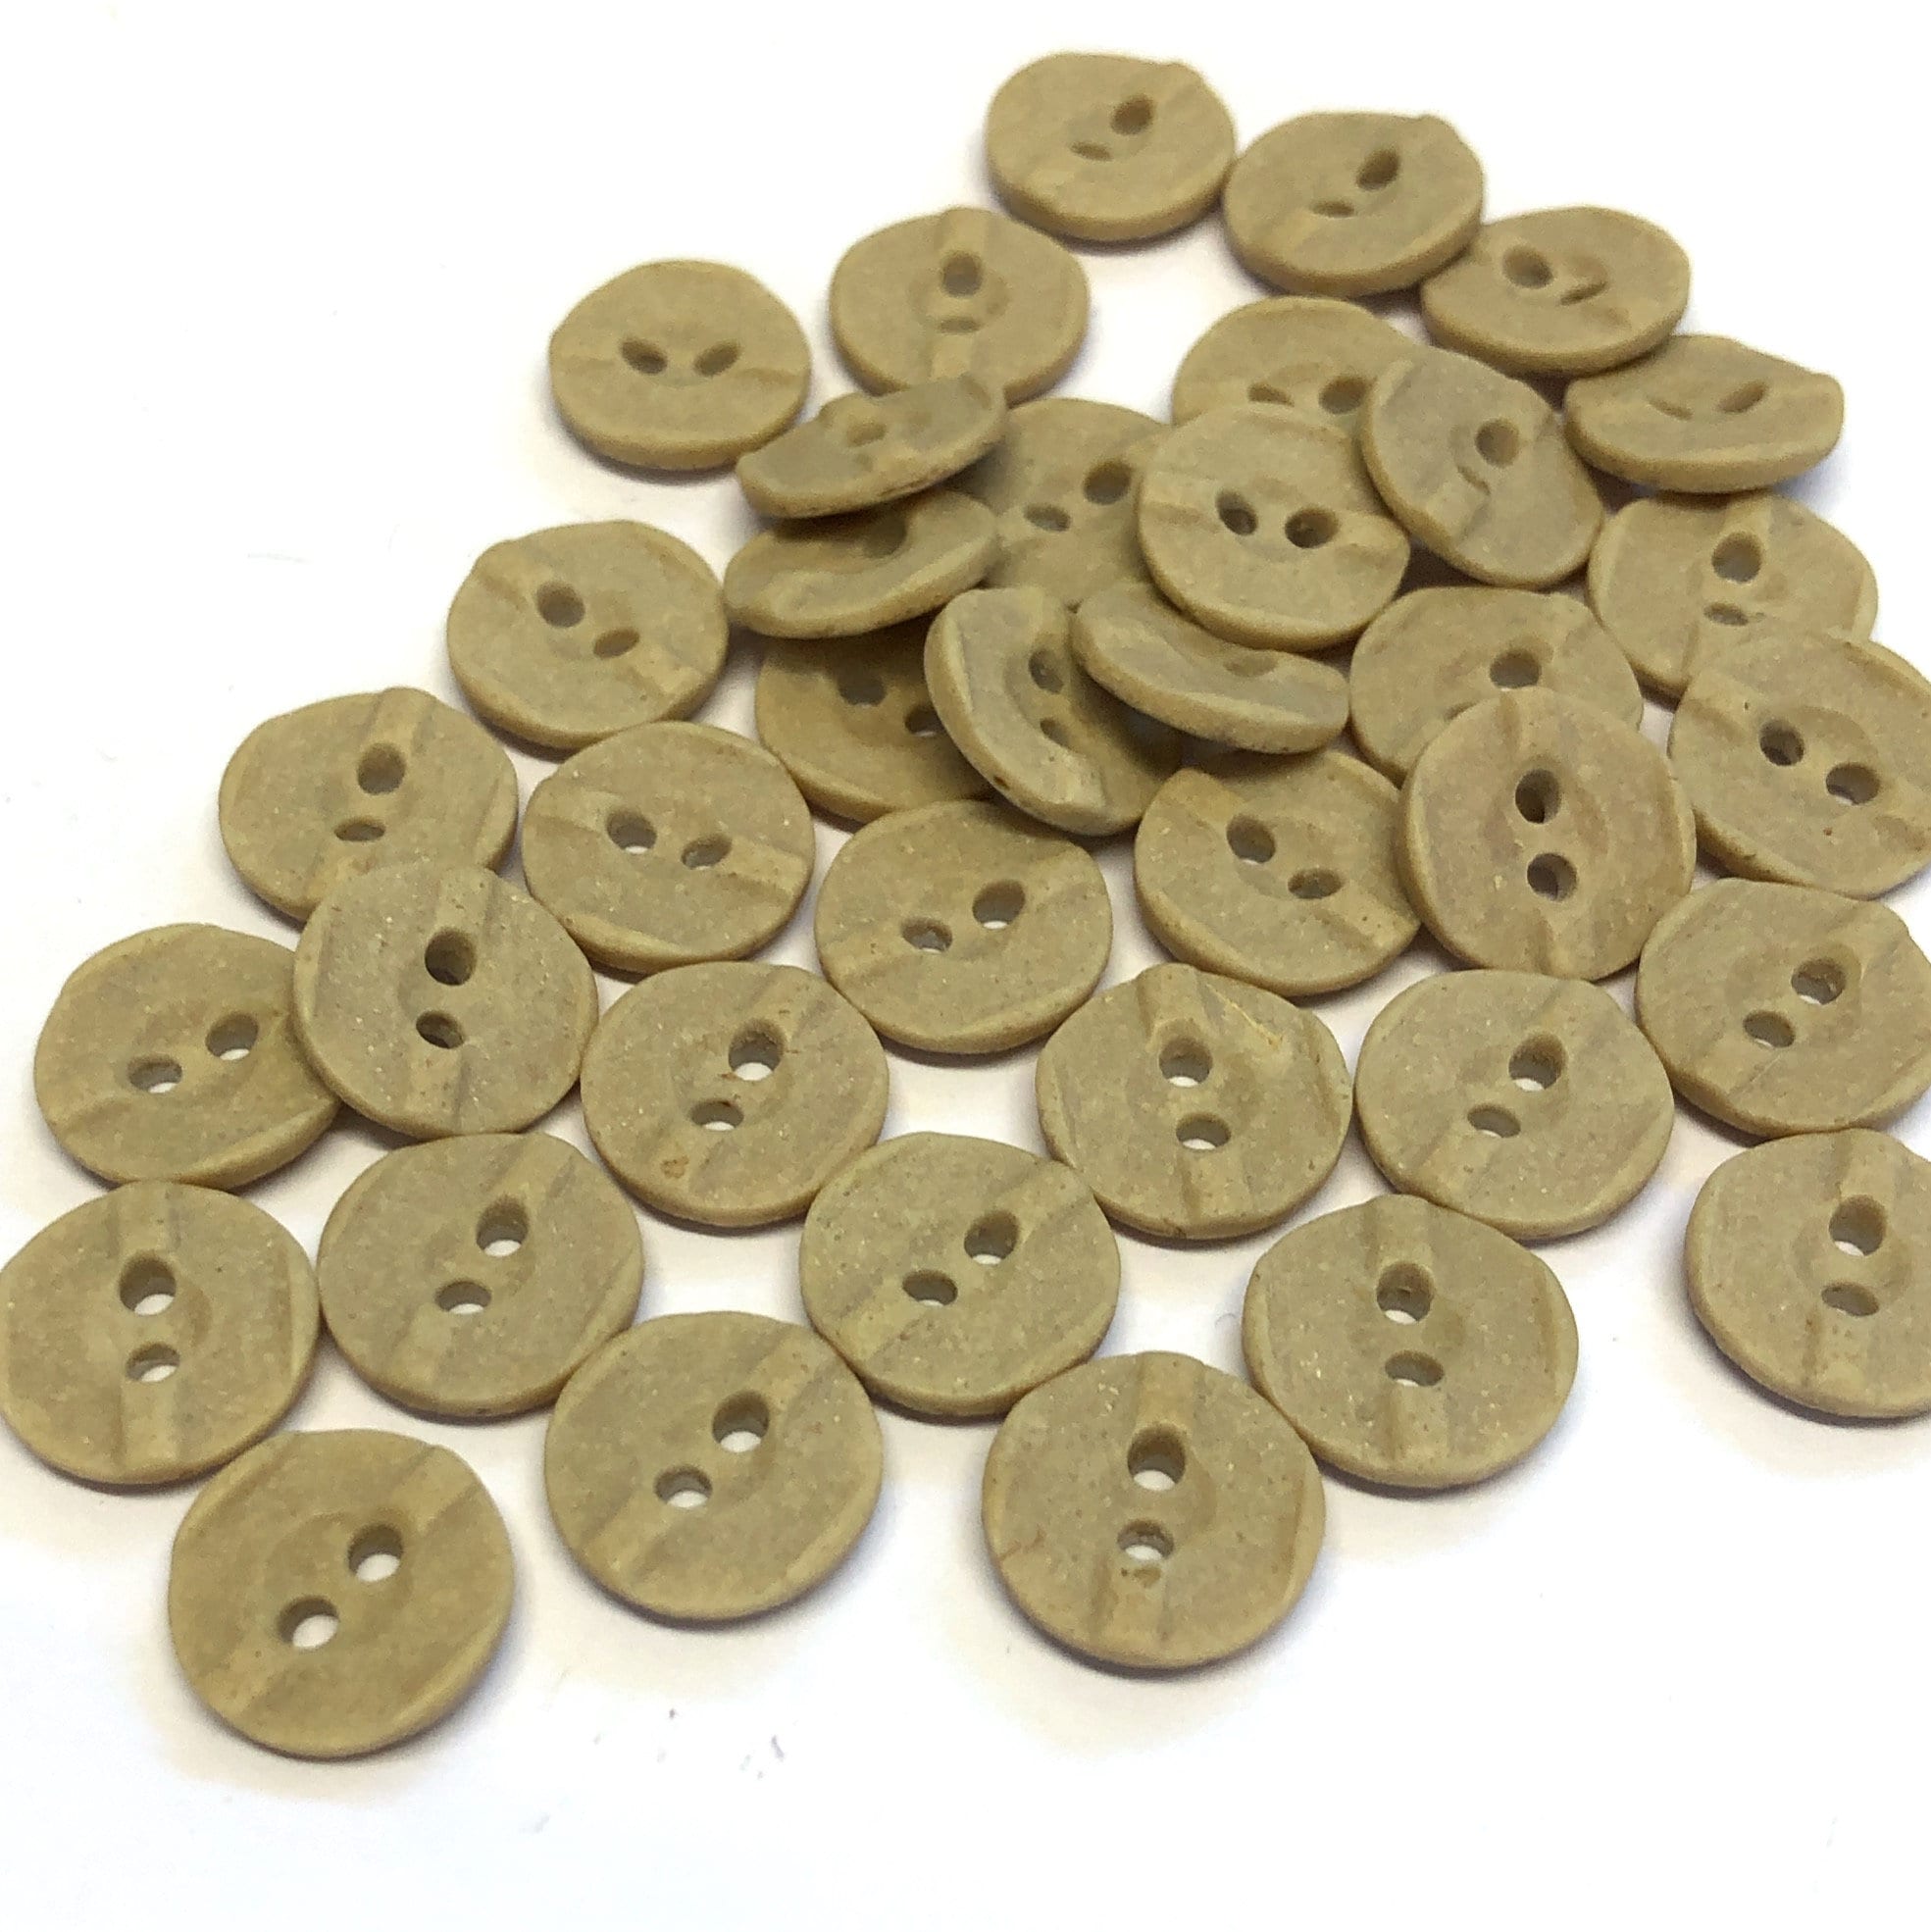 50 Grams Assorted Mixed Colour Buttons, Assorted Buttons, Button Art,  Choice of Colour, Mixed Buttons, Assorted Buttons, Buttonart 